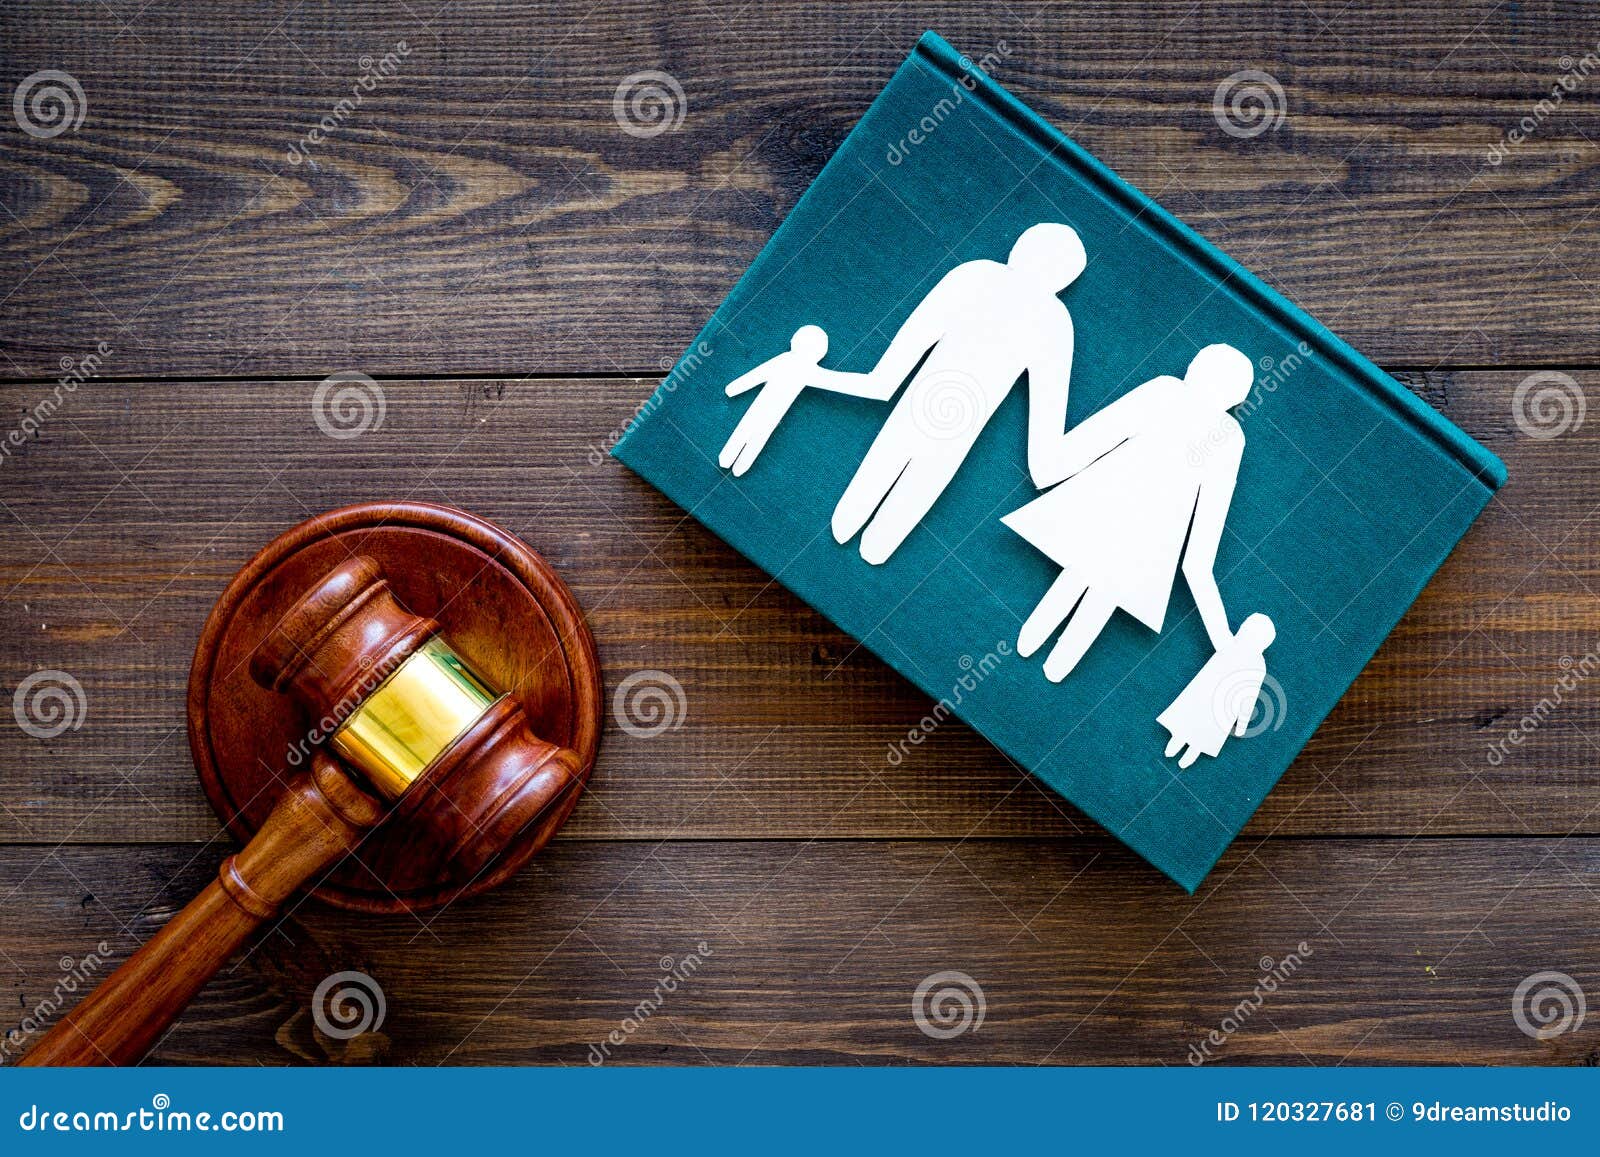 family law, family right concept. child-custody concept. family with children cutout near court gavel on dark wooden